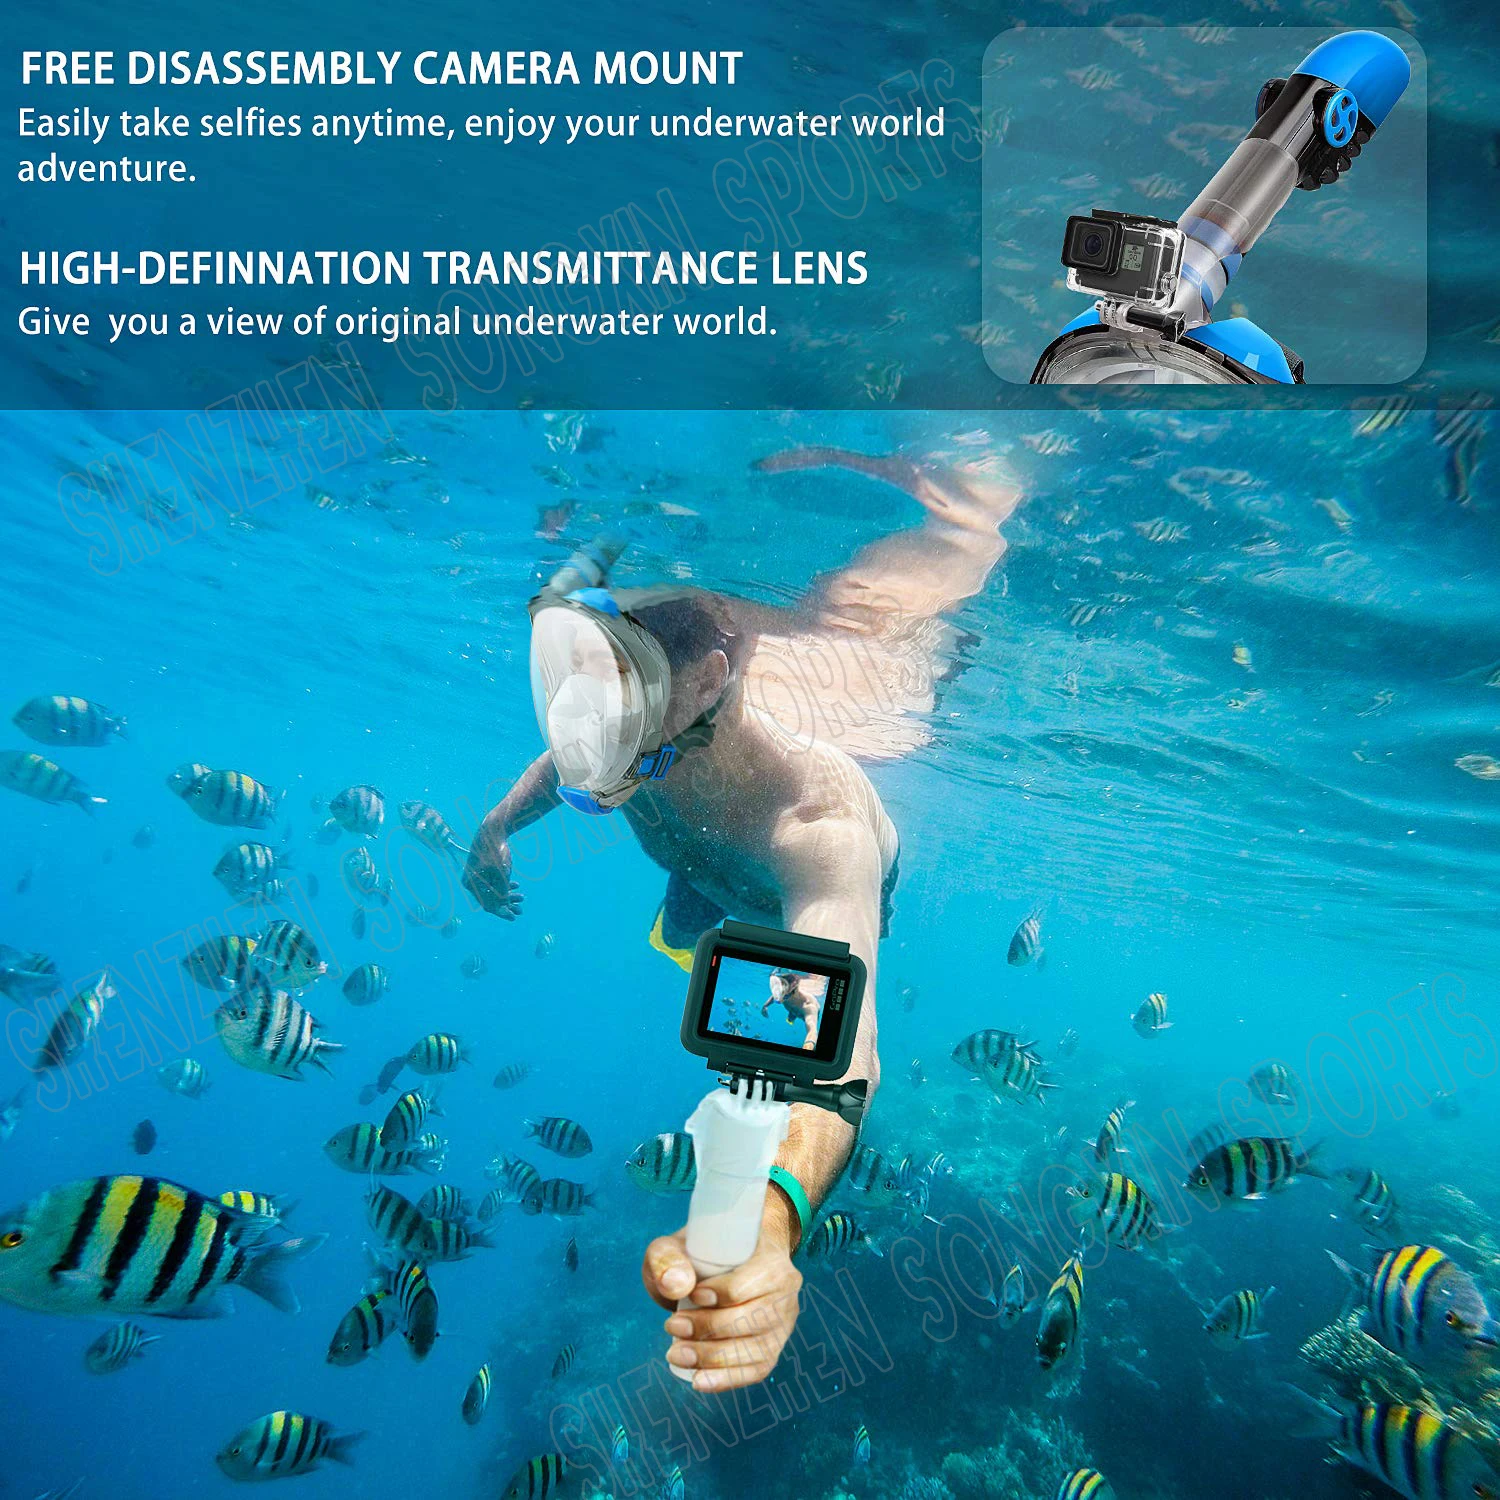 2021 Full Face Snorkel Mask 180 Degre Adjustable Head Straps Diving Equipment With Go Pro Mount